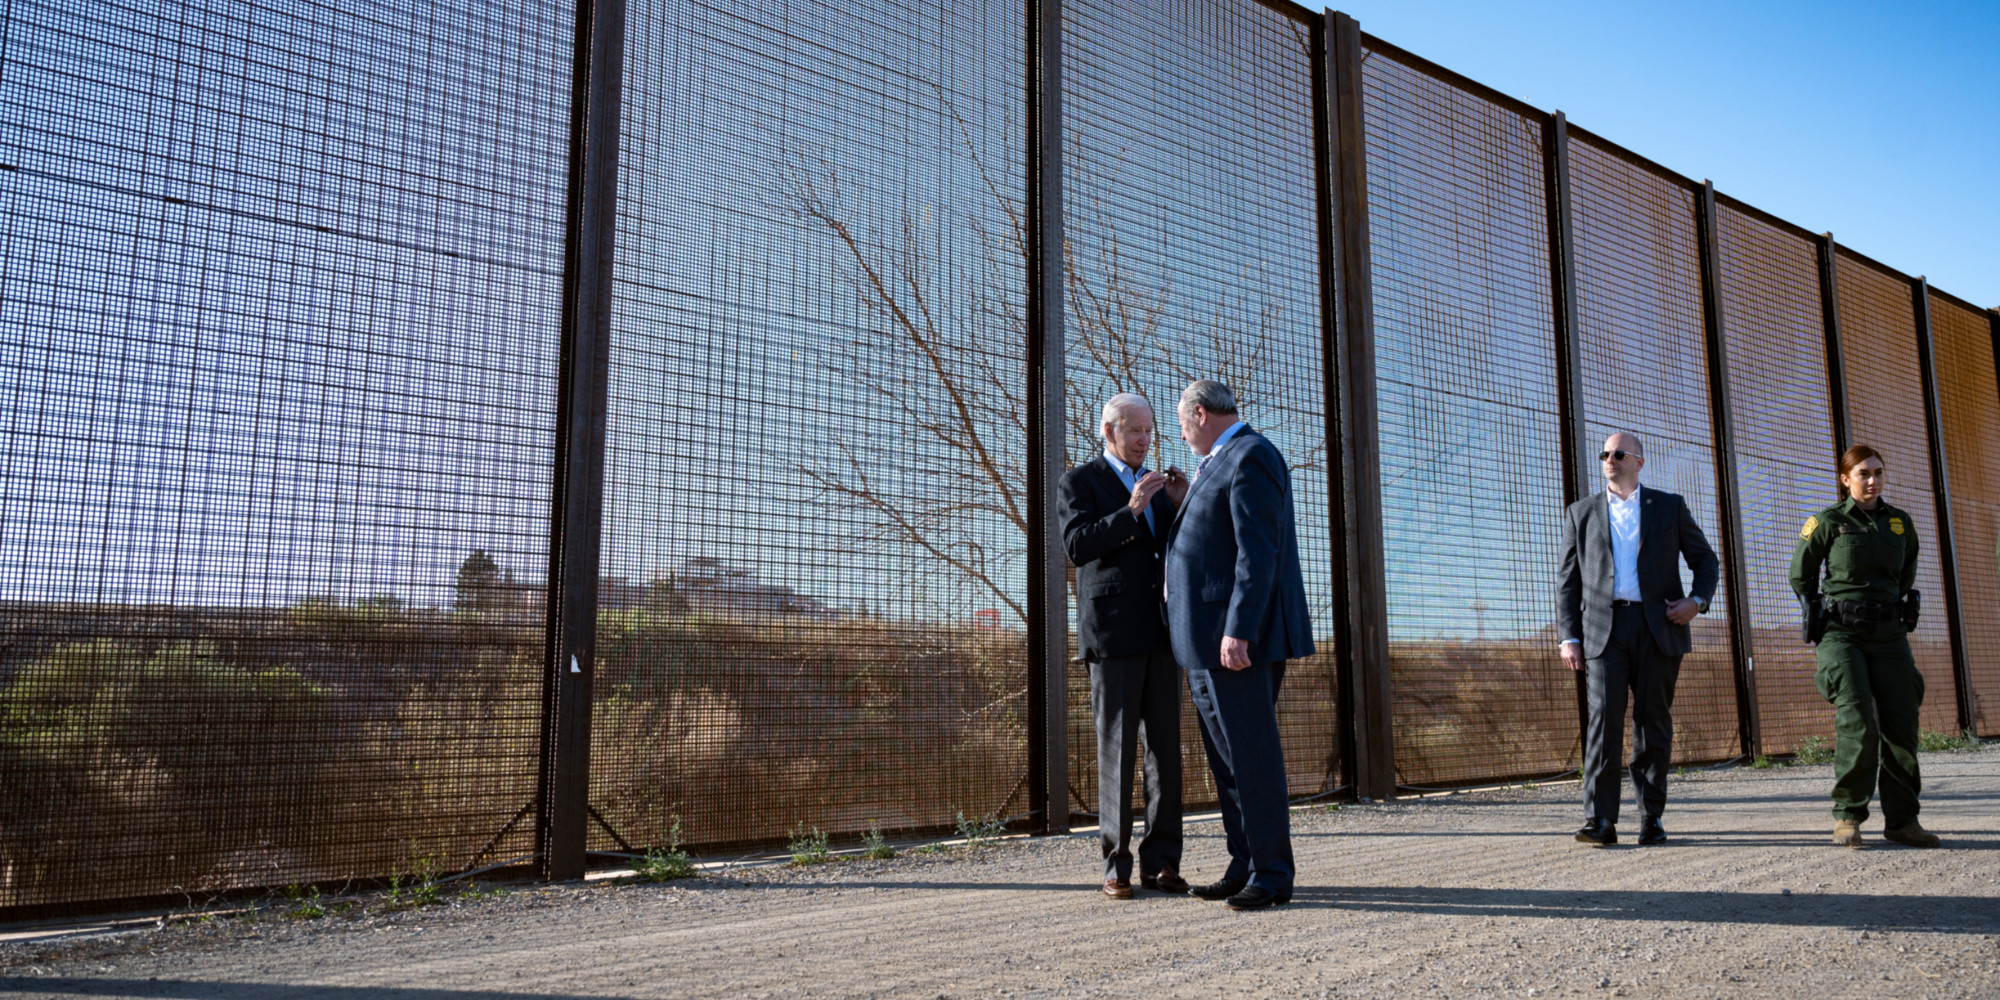 Joe Biden at the Mexico border to find a solution to the migration crisis